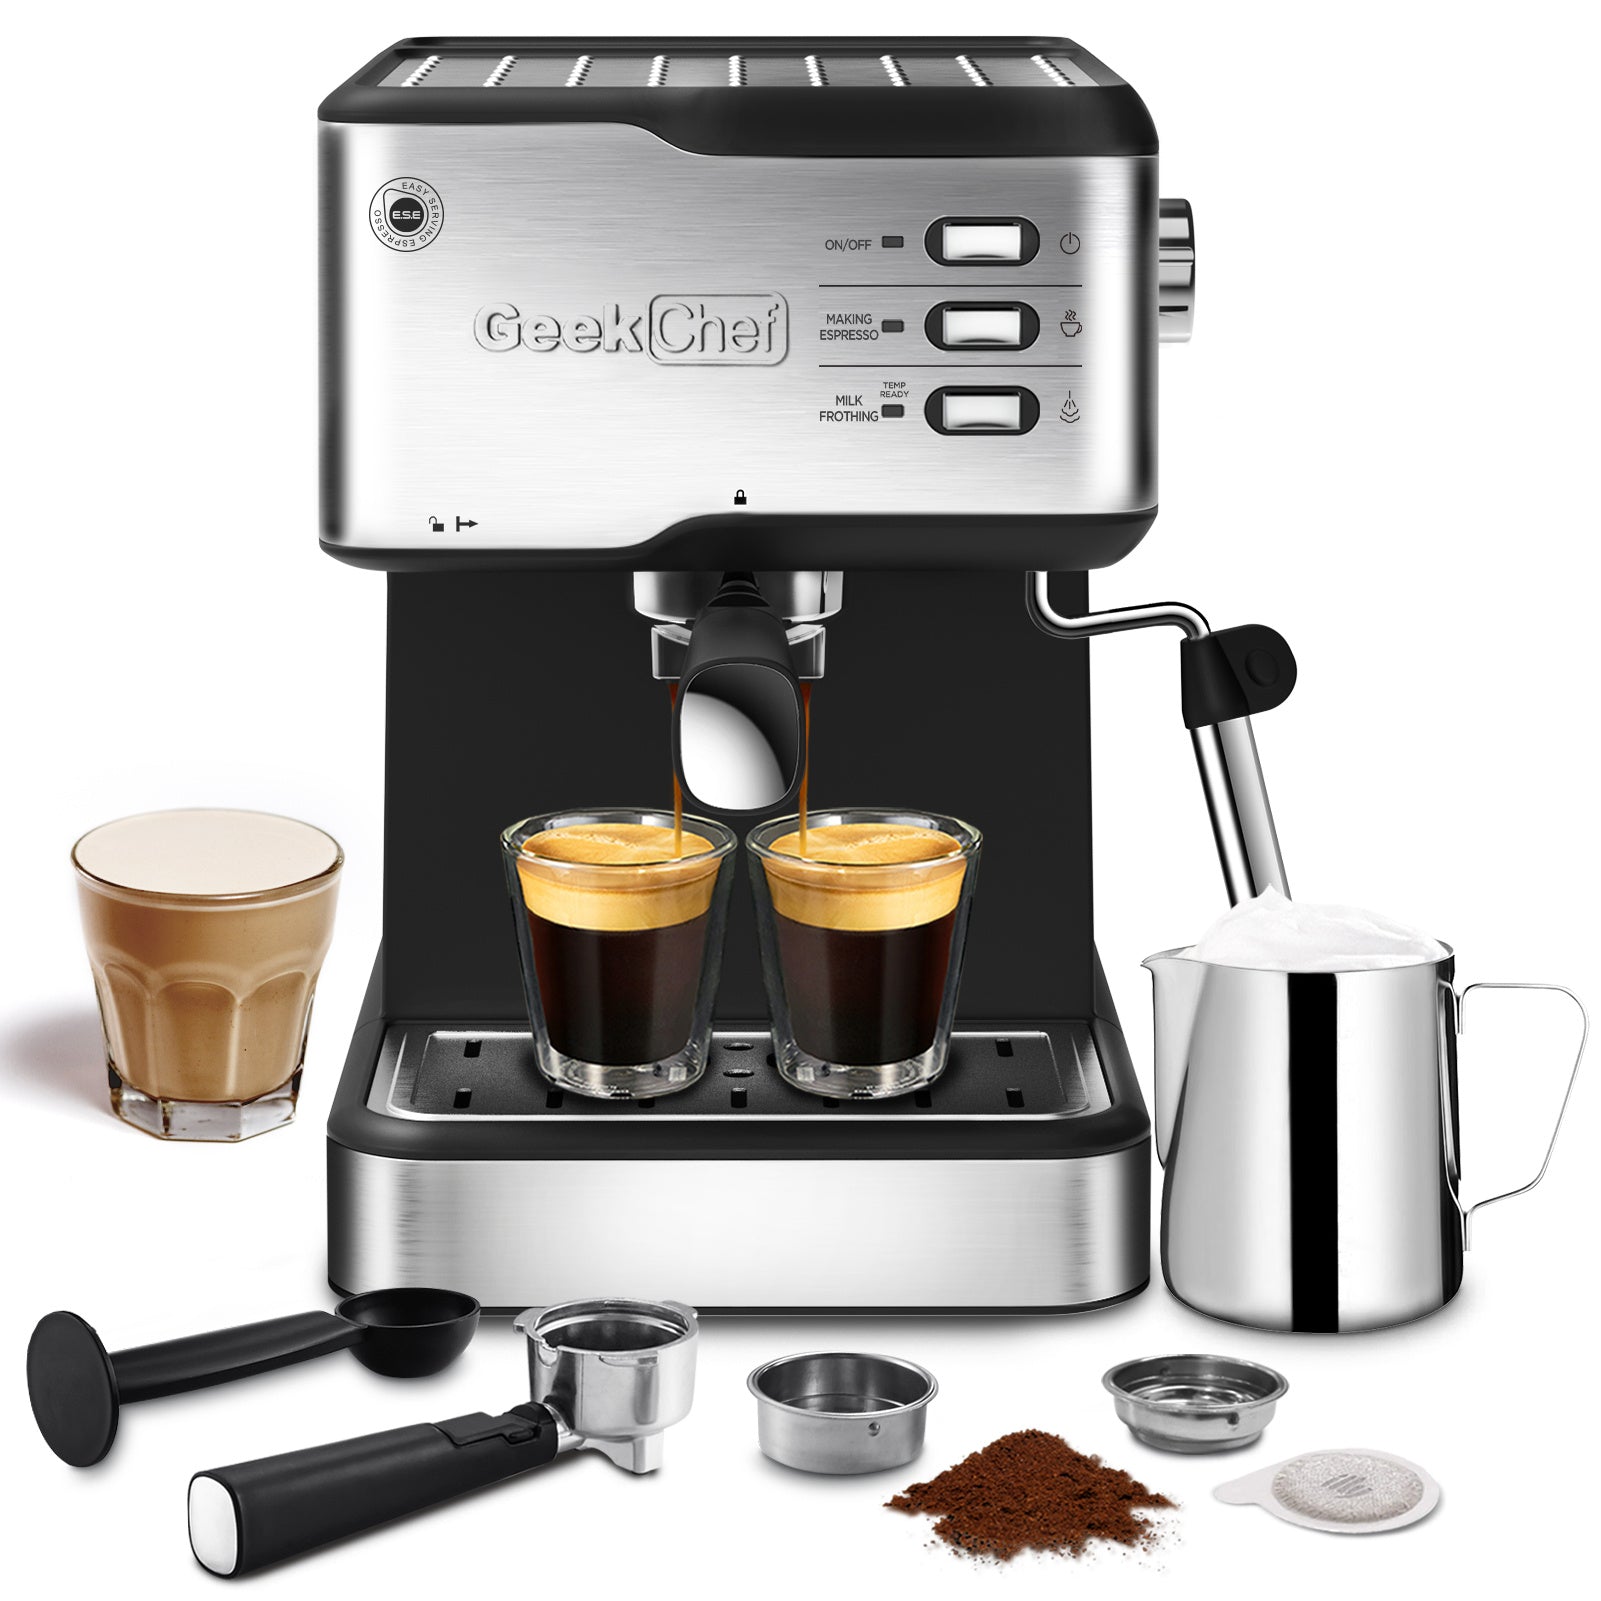 Indulge in Café-Quality Coffee with the Geek Chef Espresso Machine!